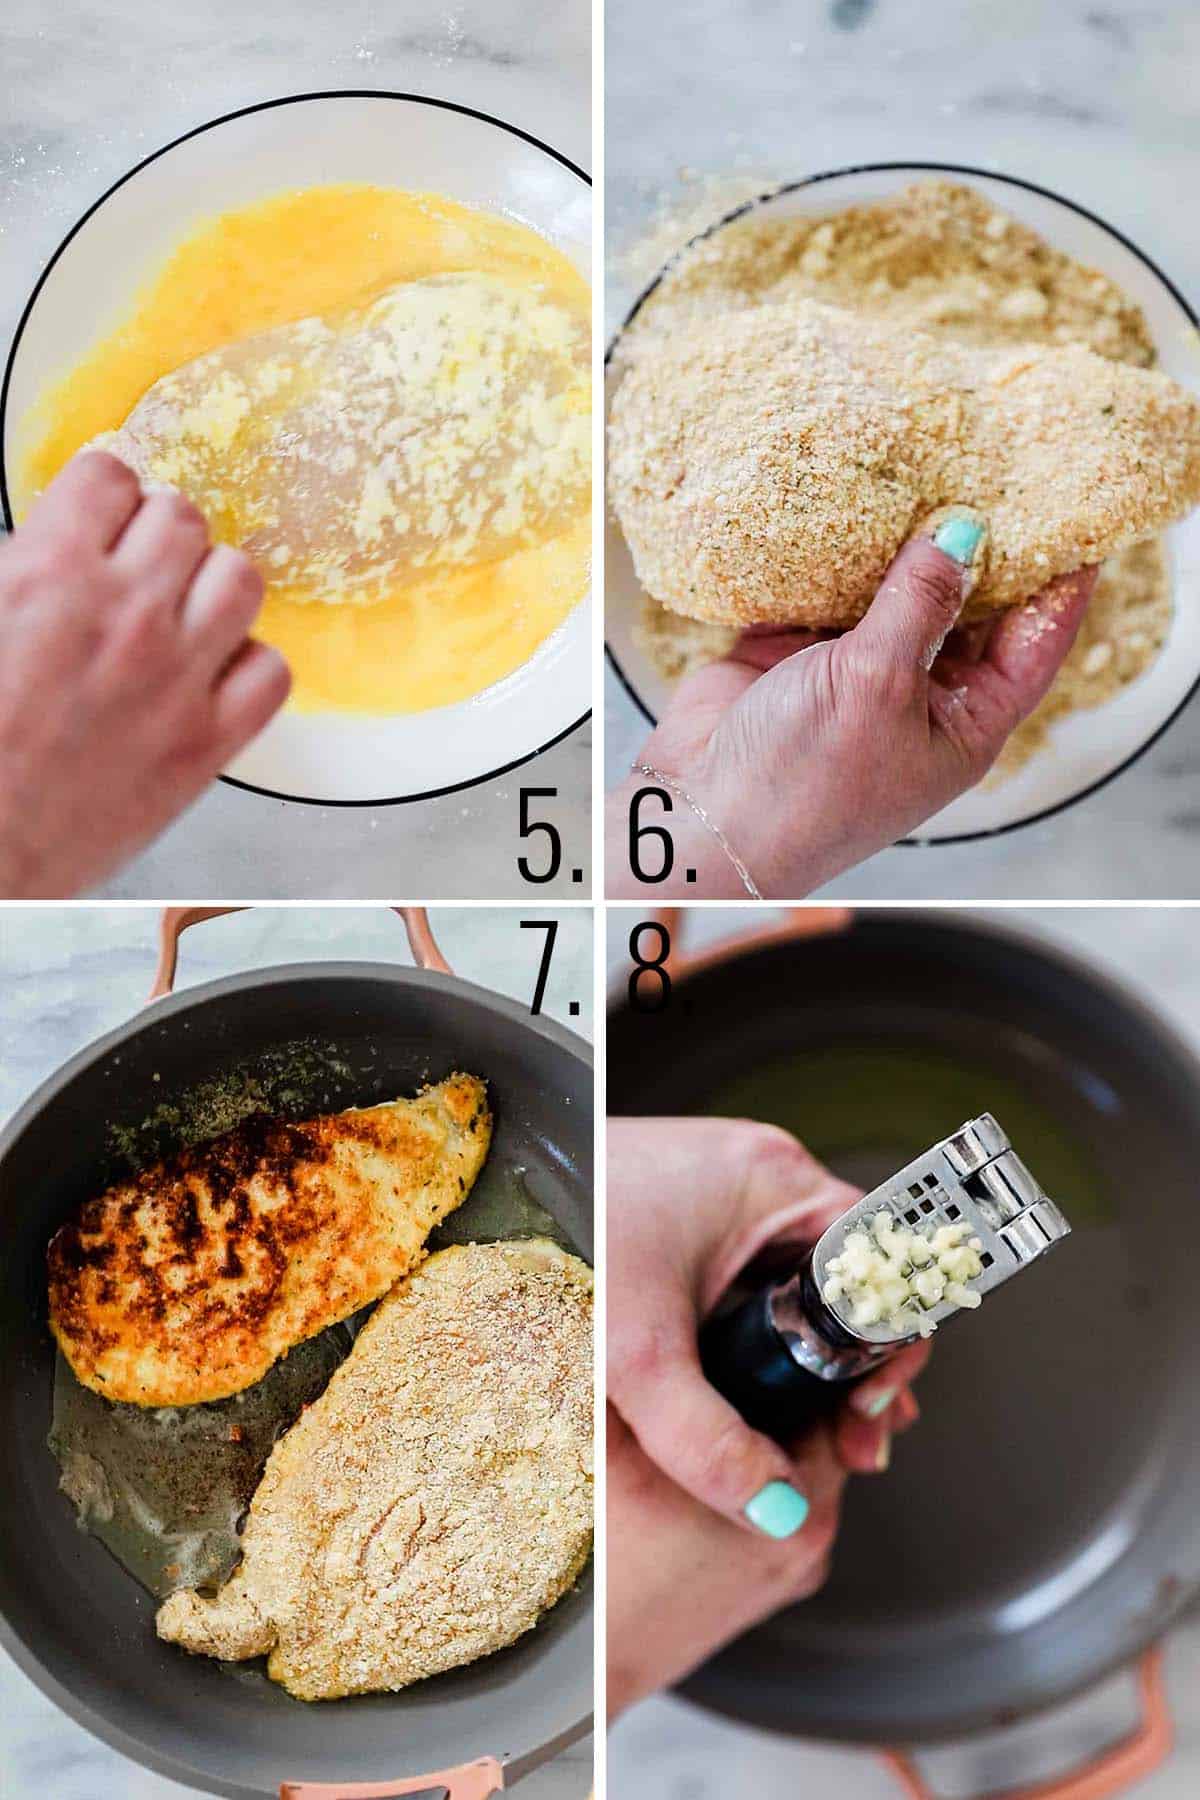 How to bread and cook chicken.